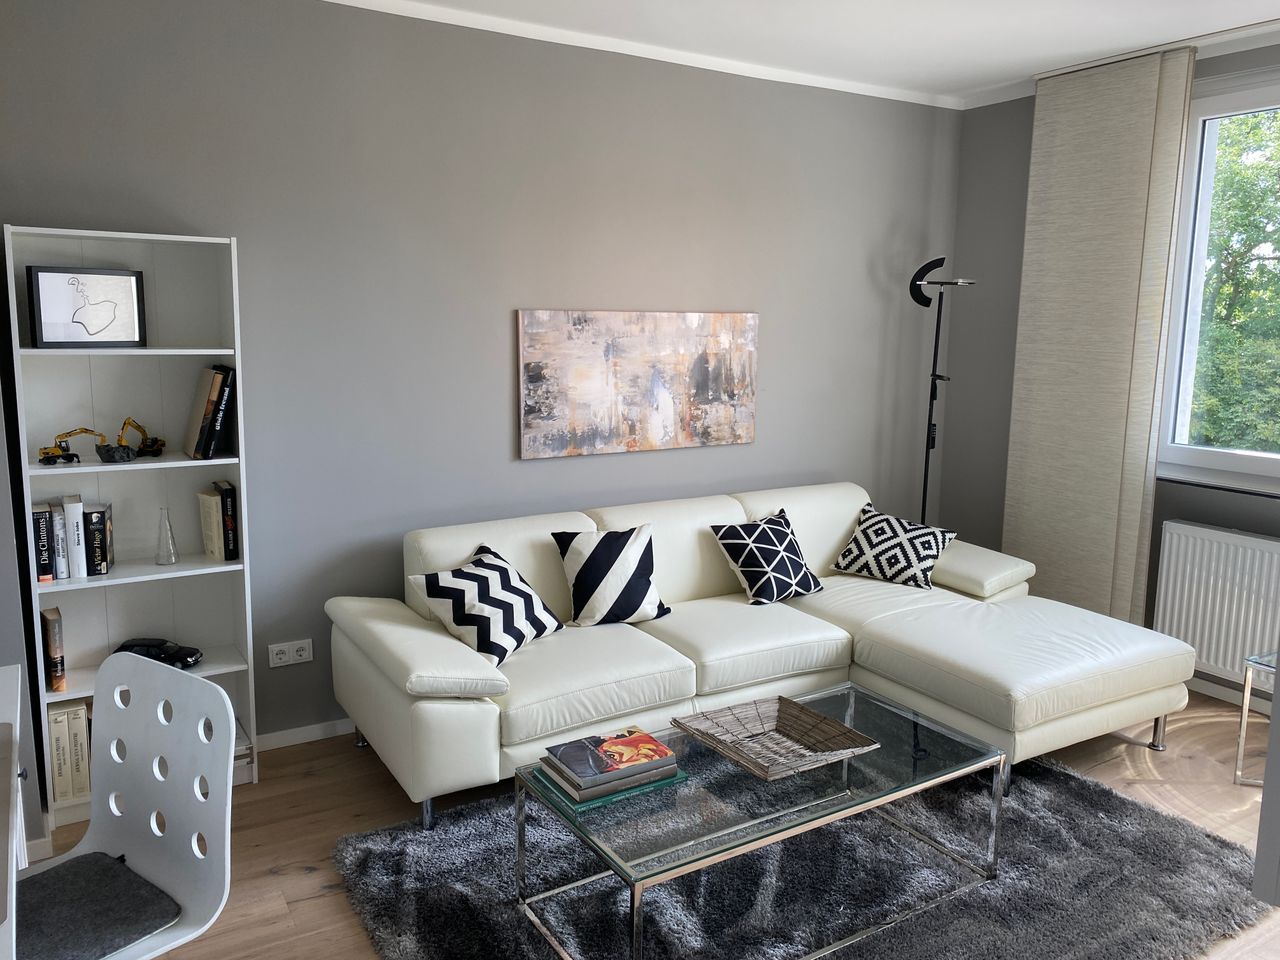 All new: refurbished, modern furnished, bright 3-room flat directly at the Zoopark